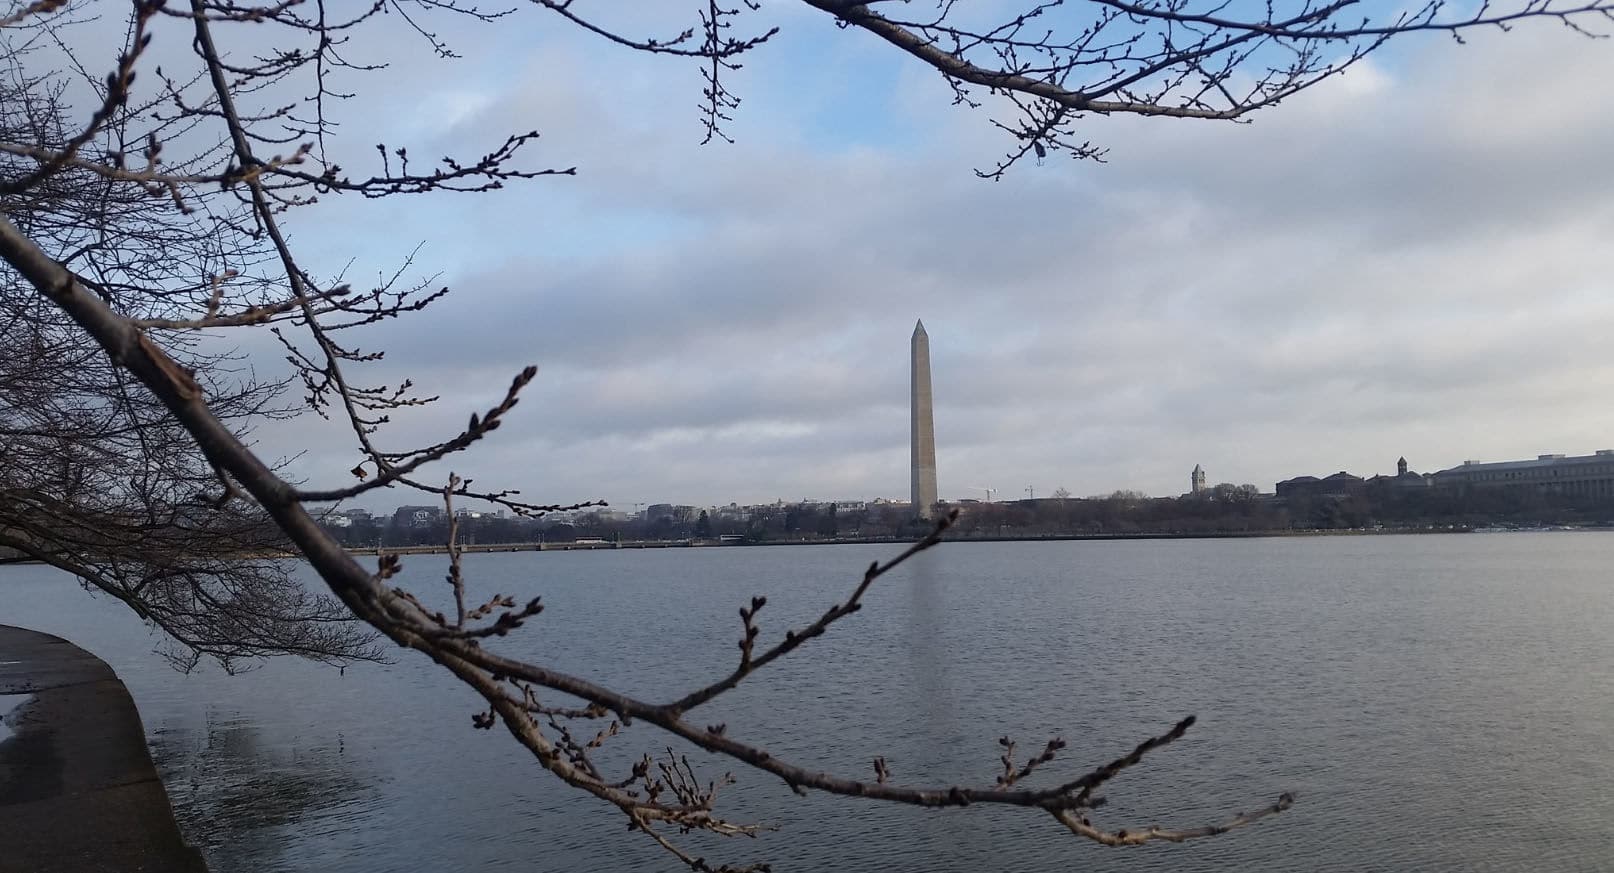 The fog gives way to balmy temperatures in D.C. on Feb. 20, 2018. (WTOP/Kathy Stewart)